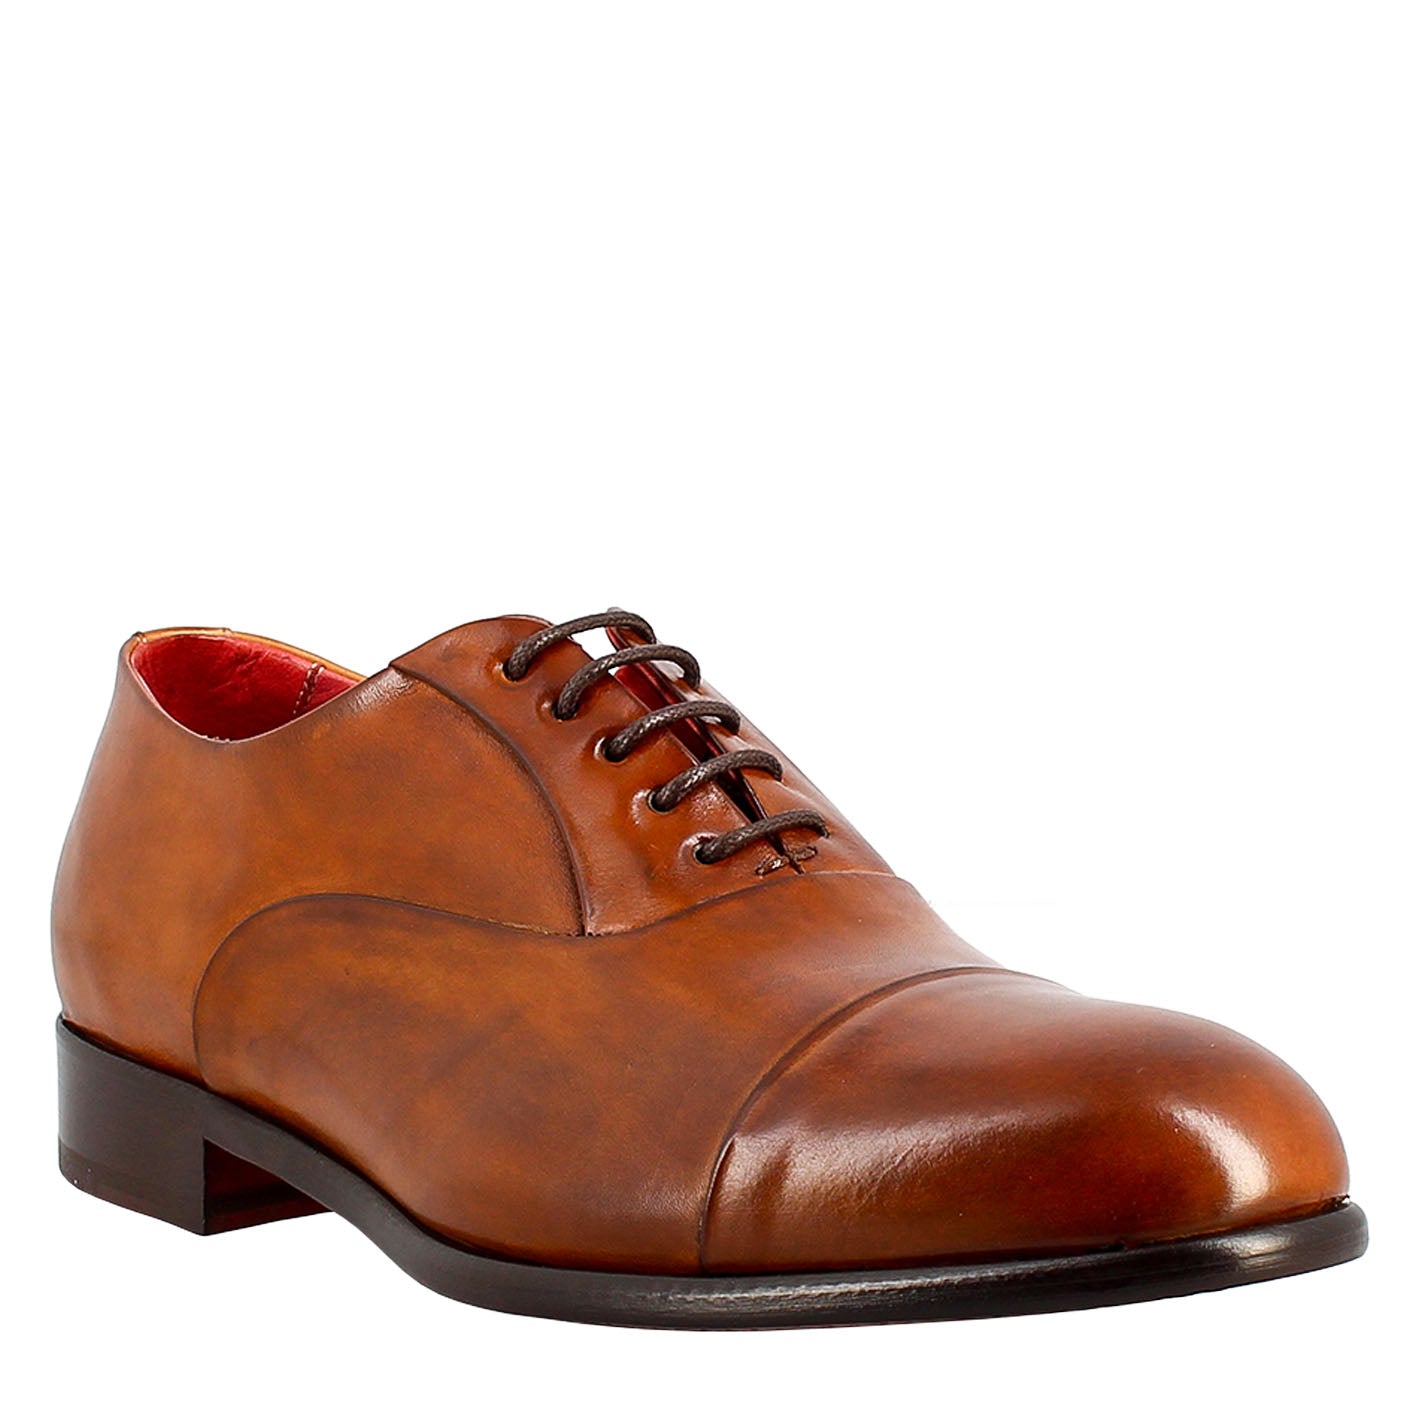 Men's elegant brown oxford in leather and red lining